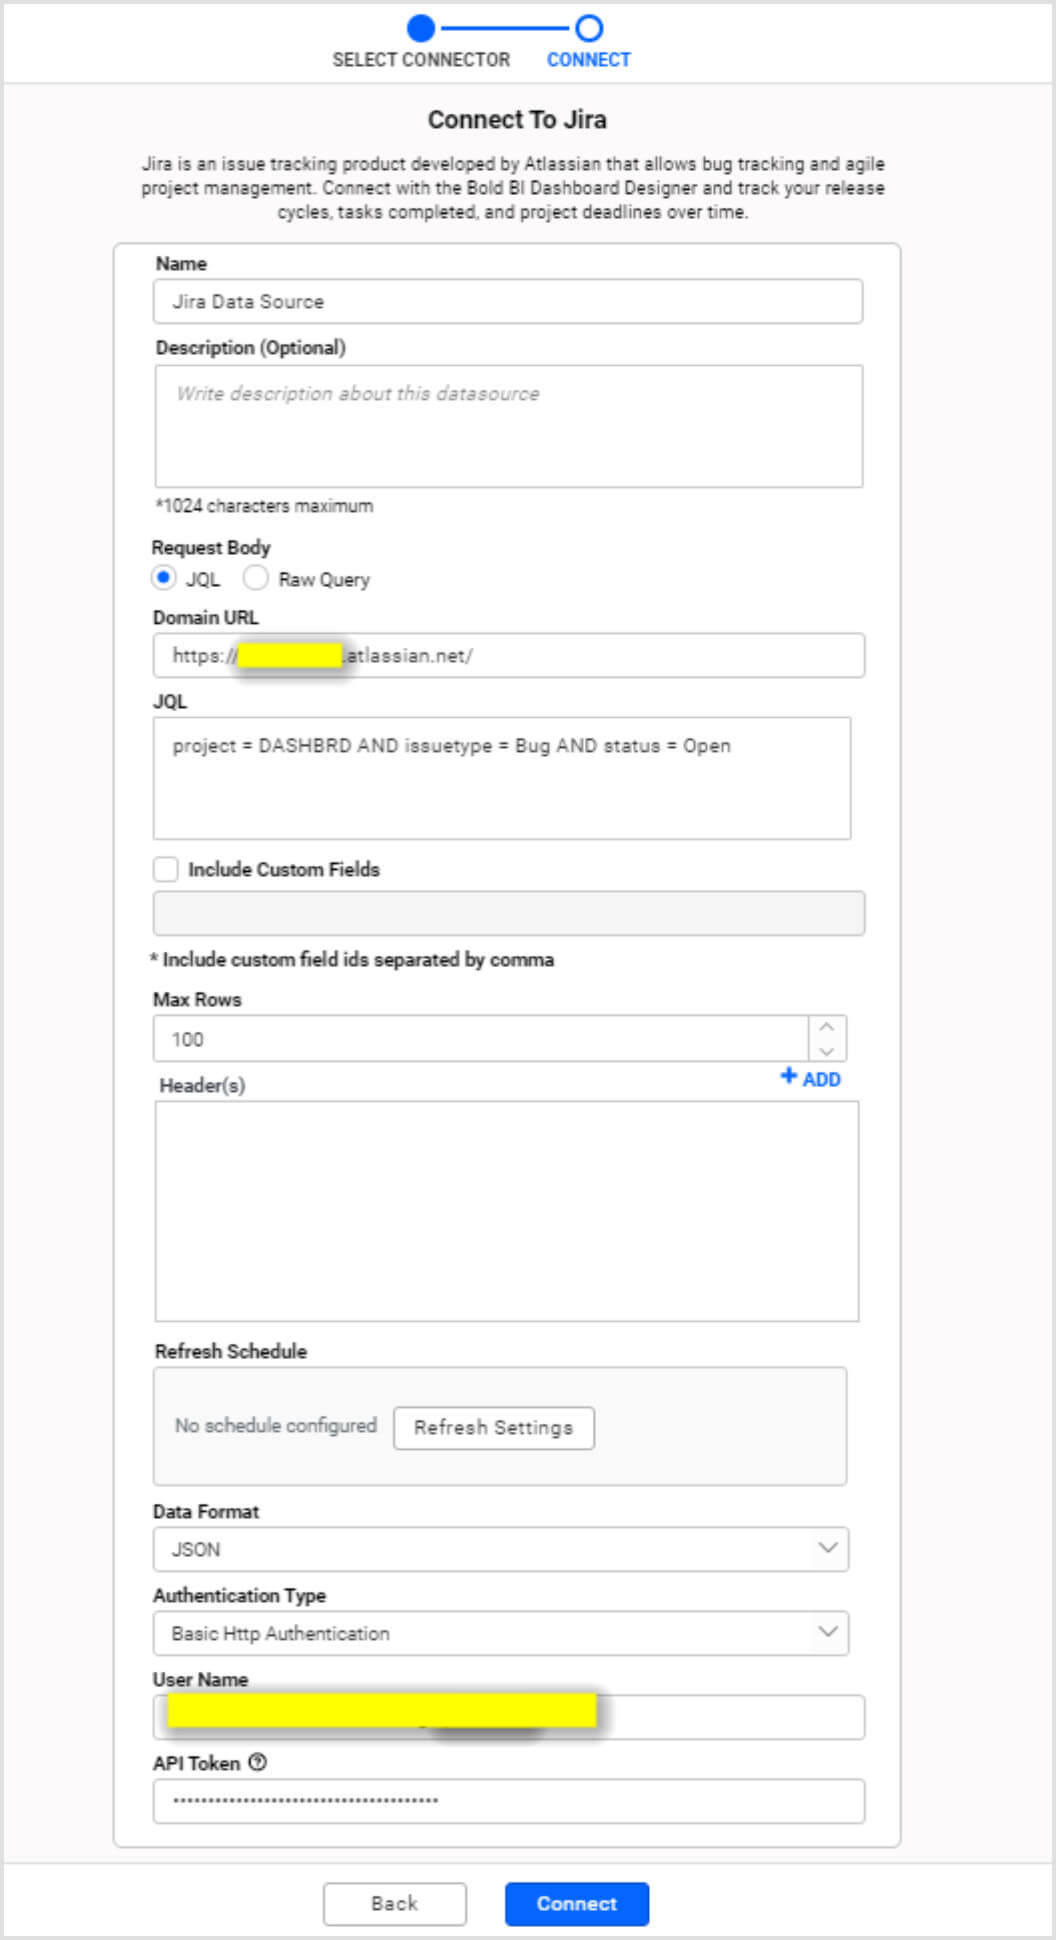 Create Data Source window for Jira connection with required fields filled